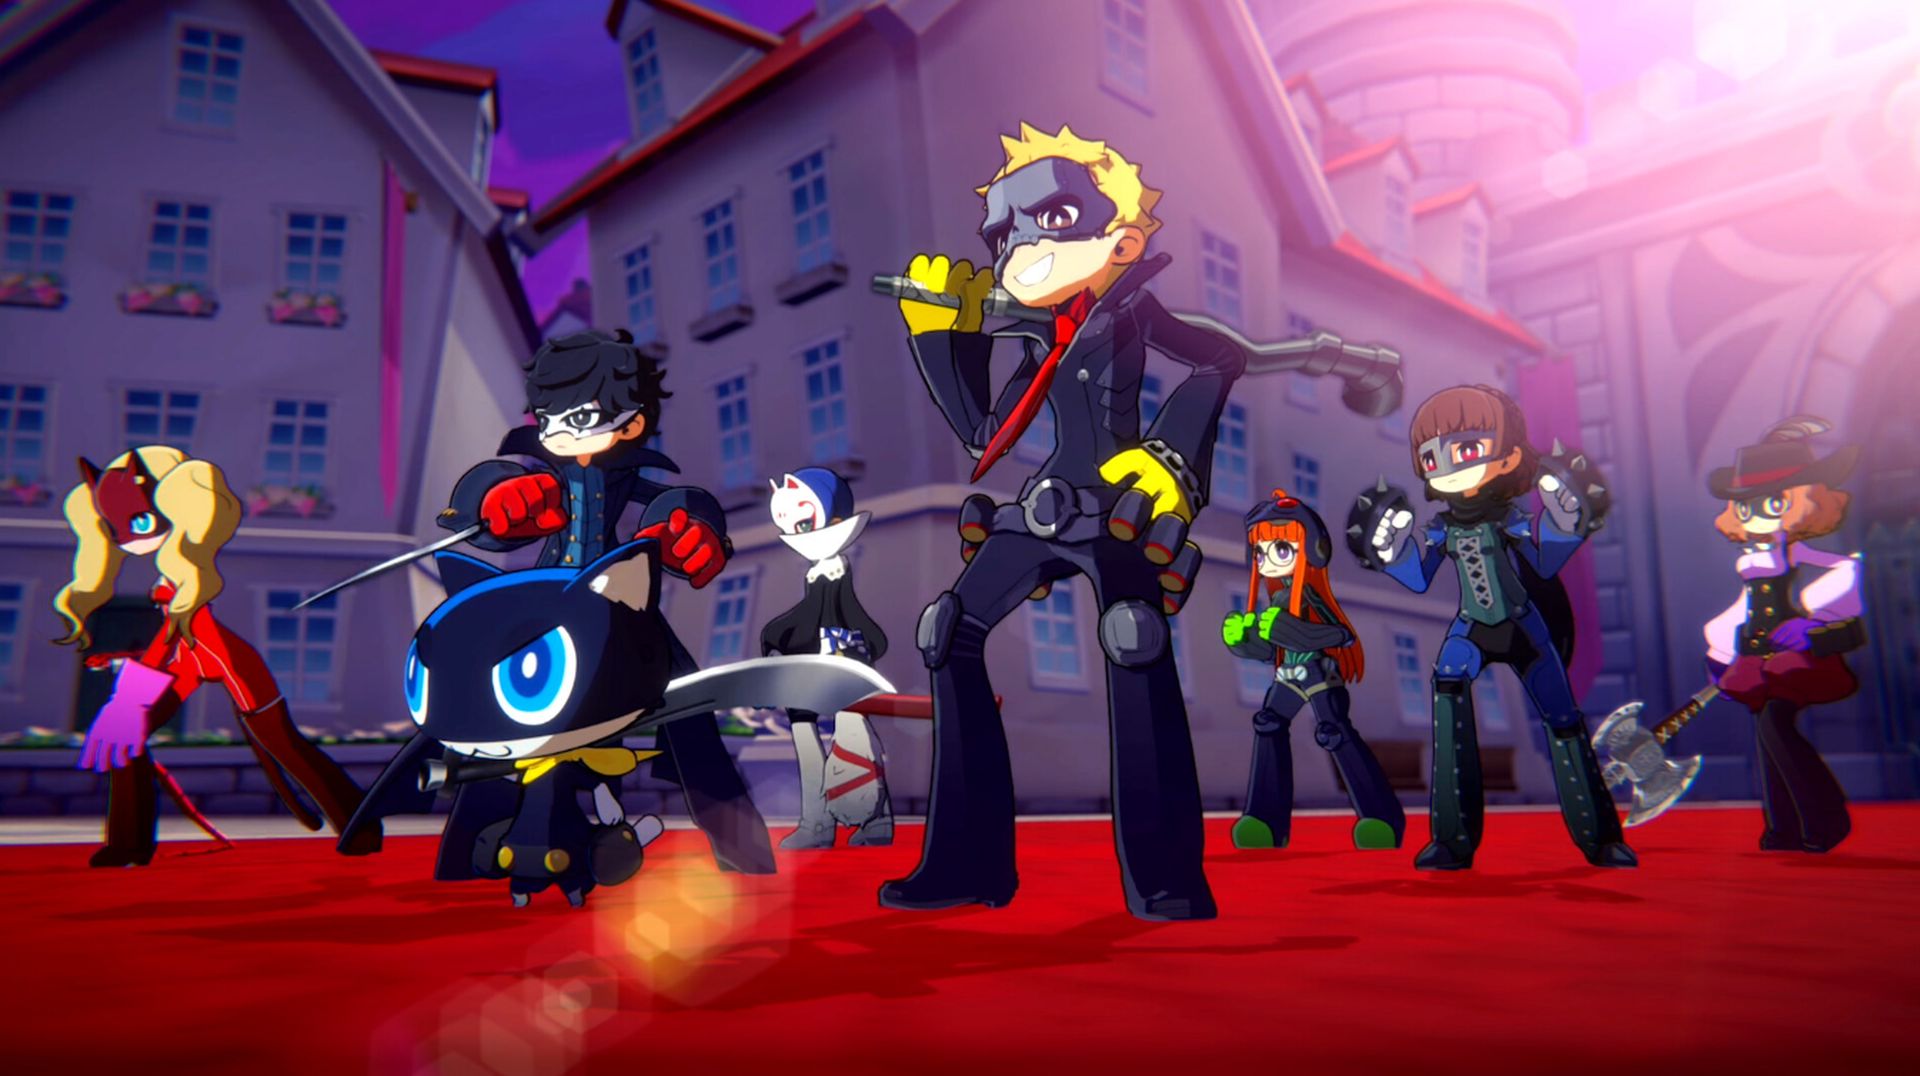 Persona 5 Tactica Quest 5: A step-by-step guide to victory